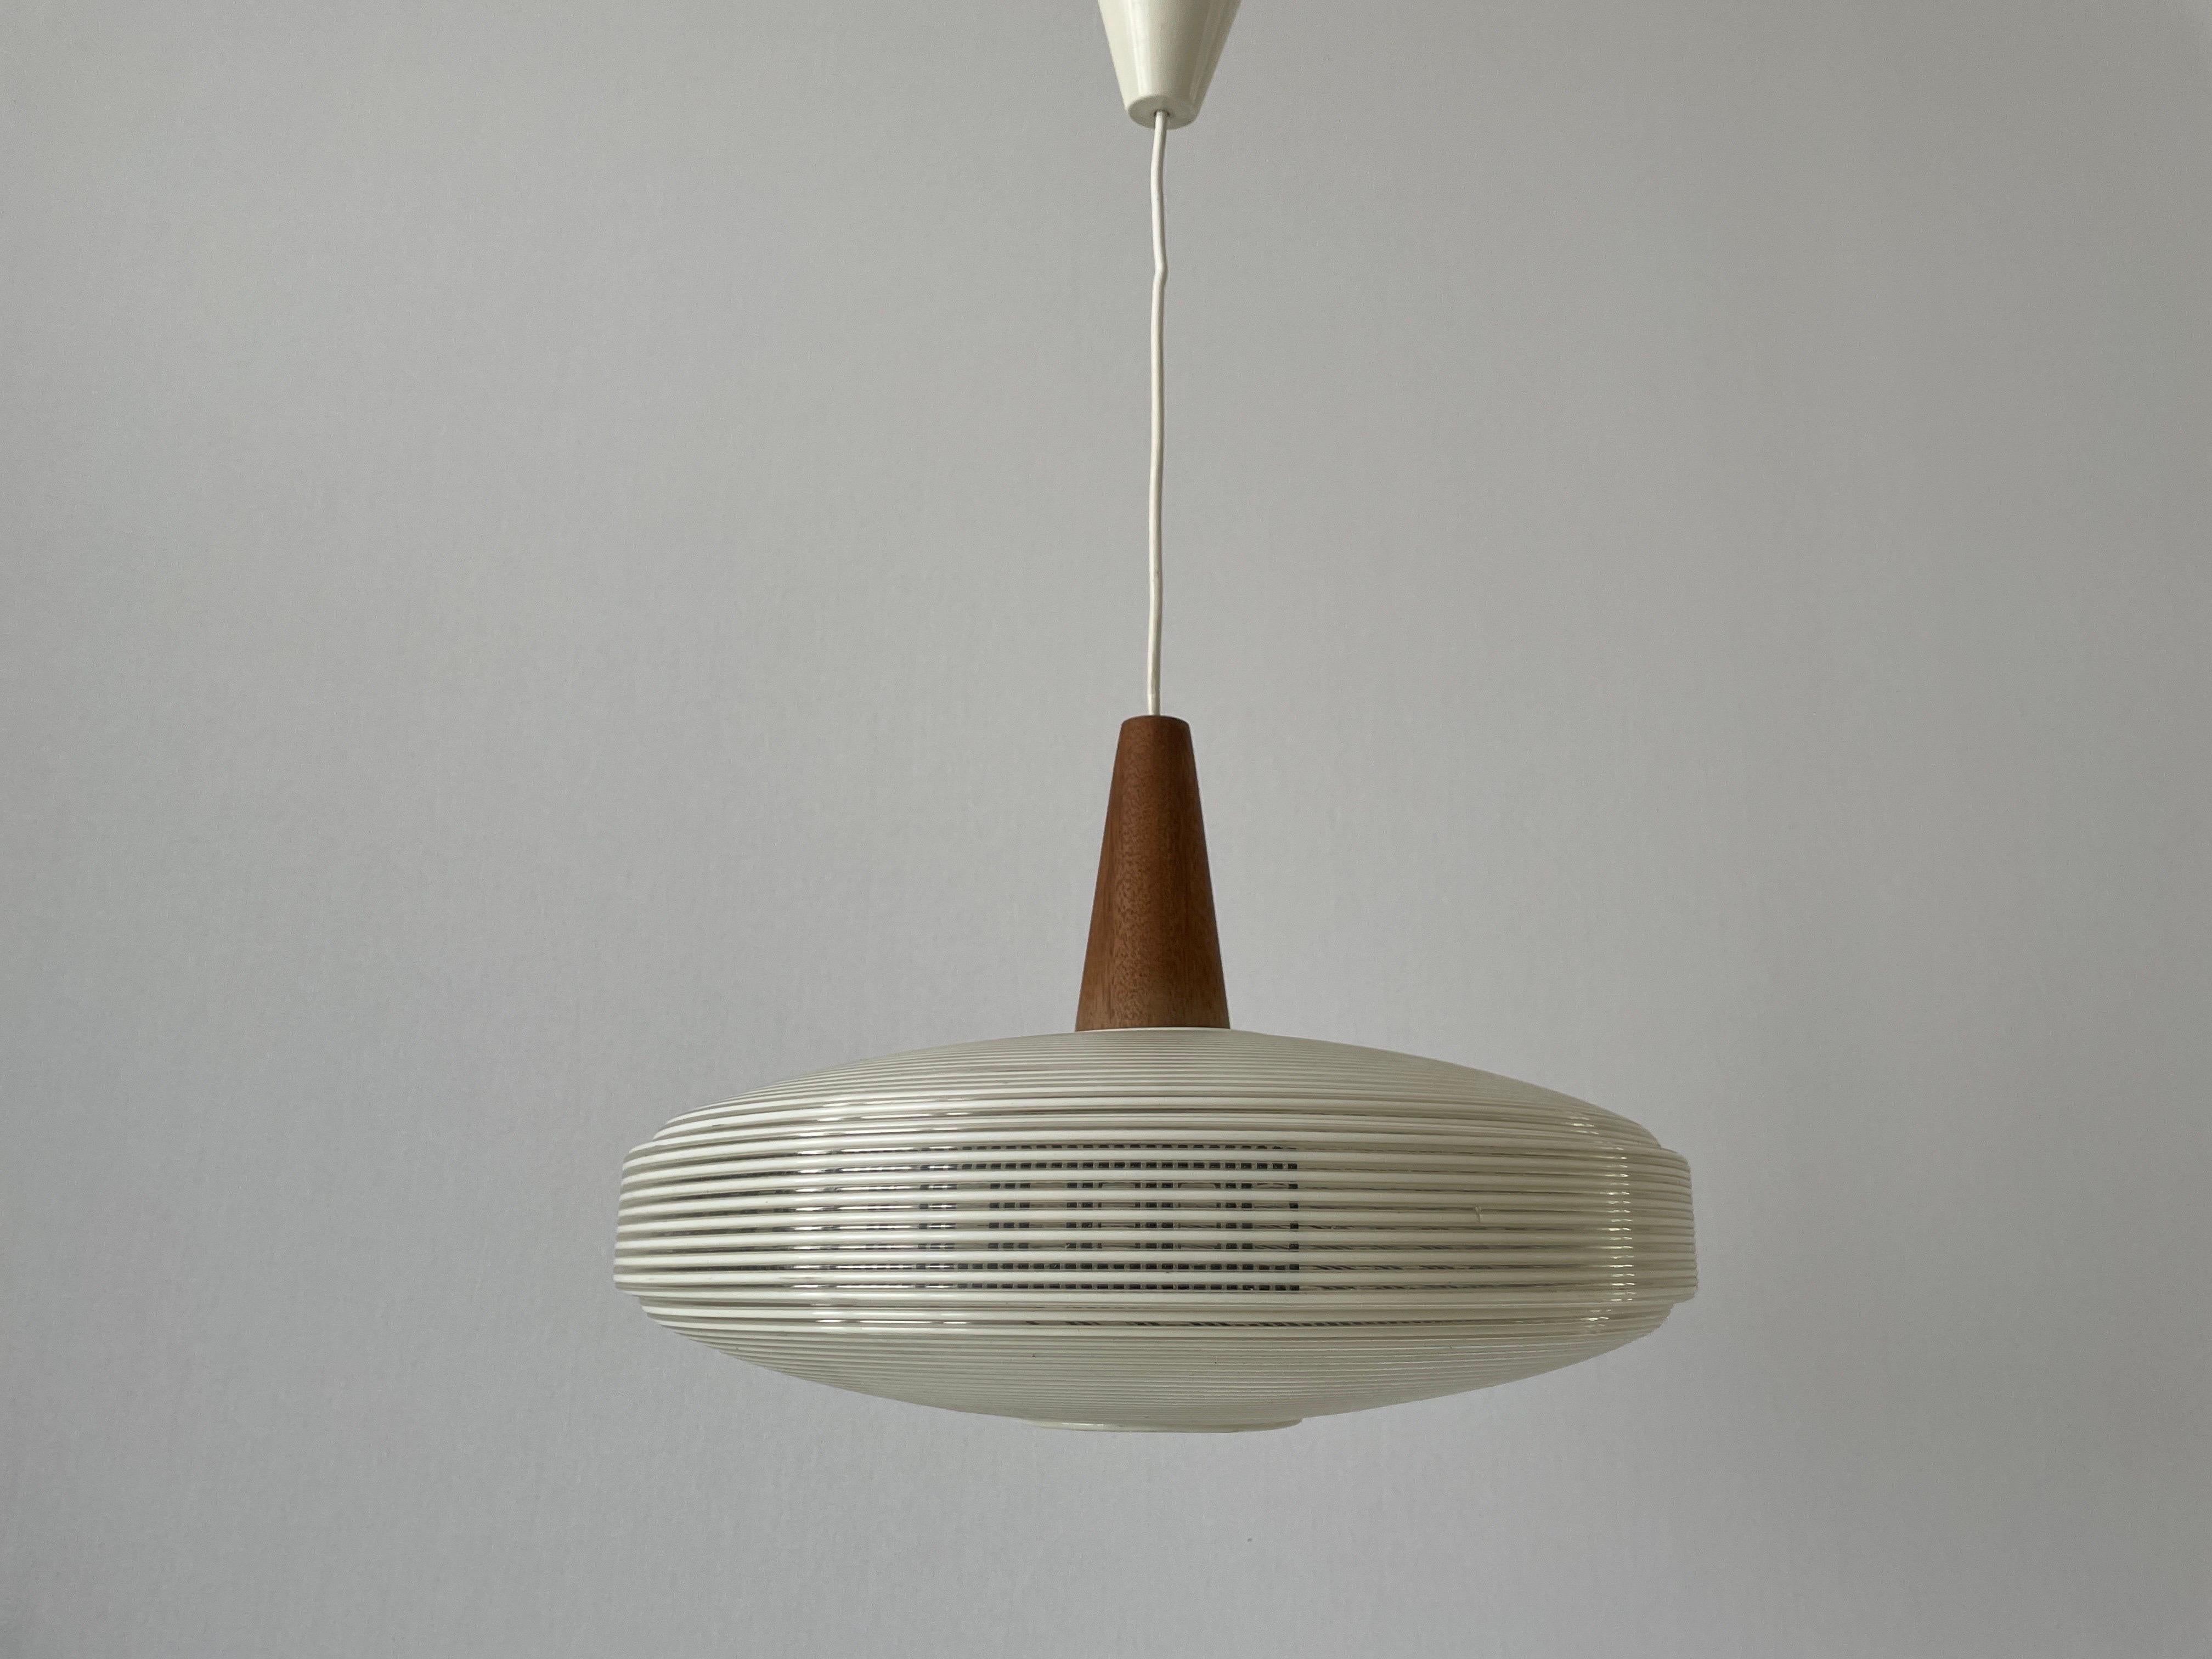 Plastic Rare Rotaflex Ceiling Lamp by Yasha Heifetz with Teak Detail, 1960s Germany For Sale